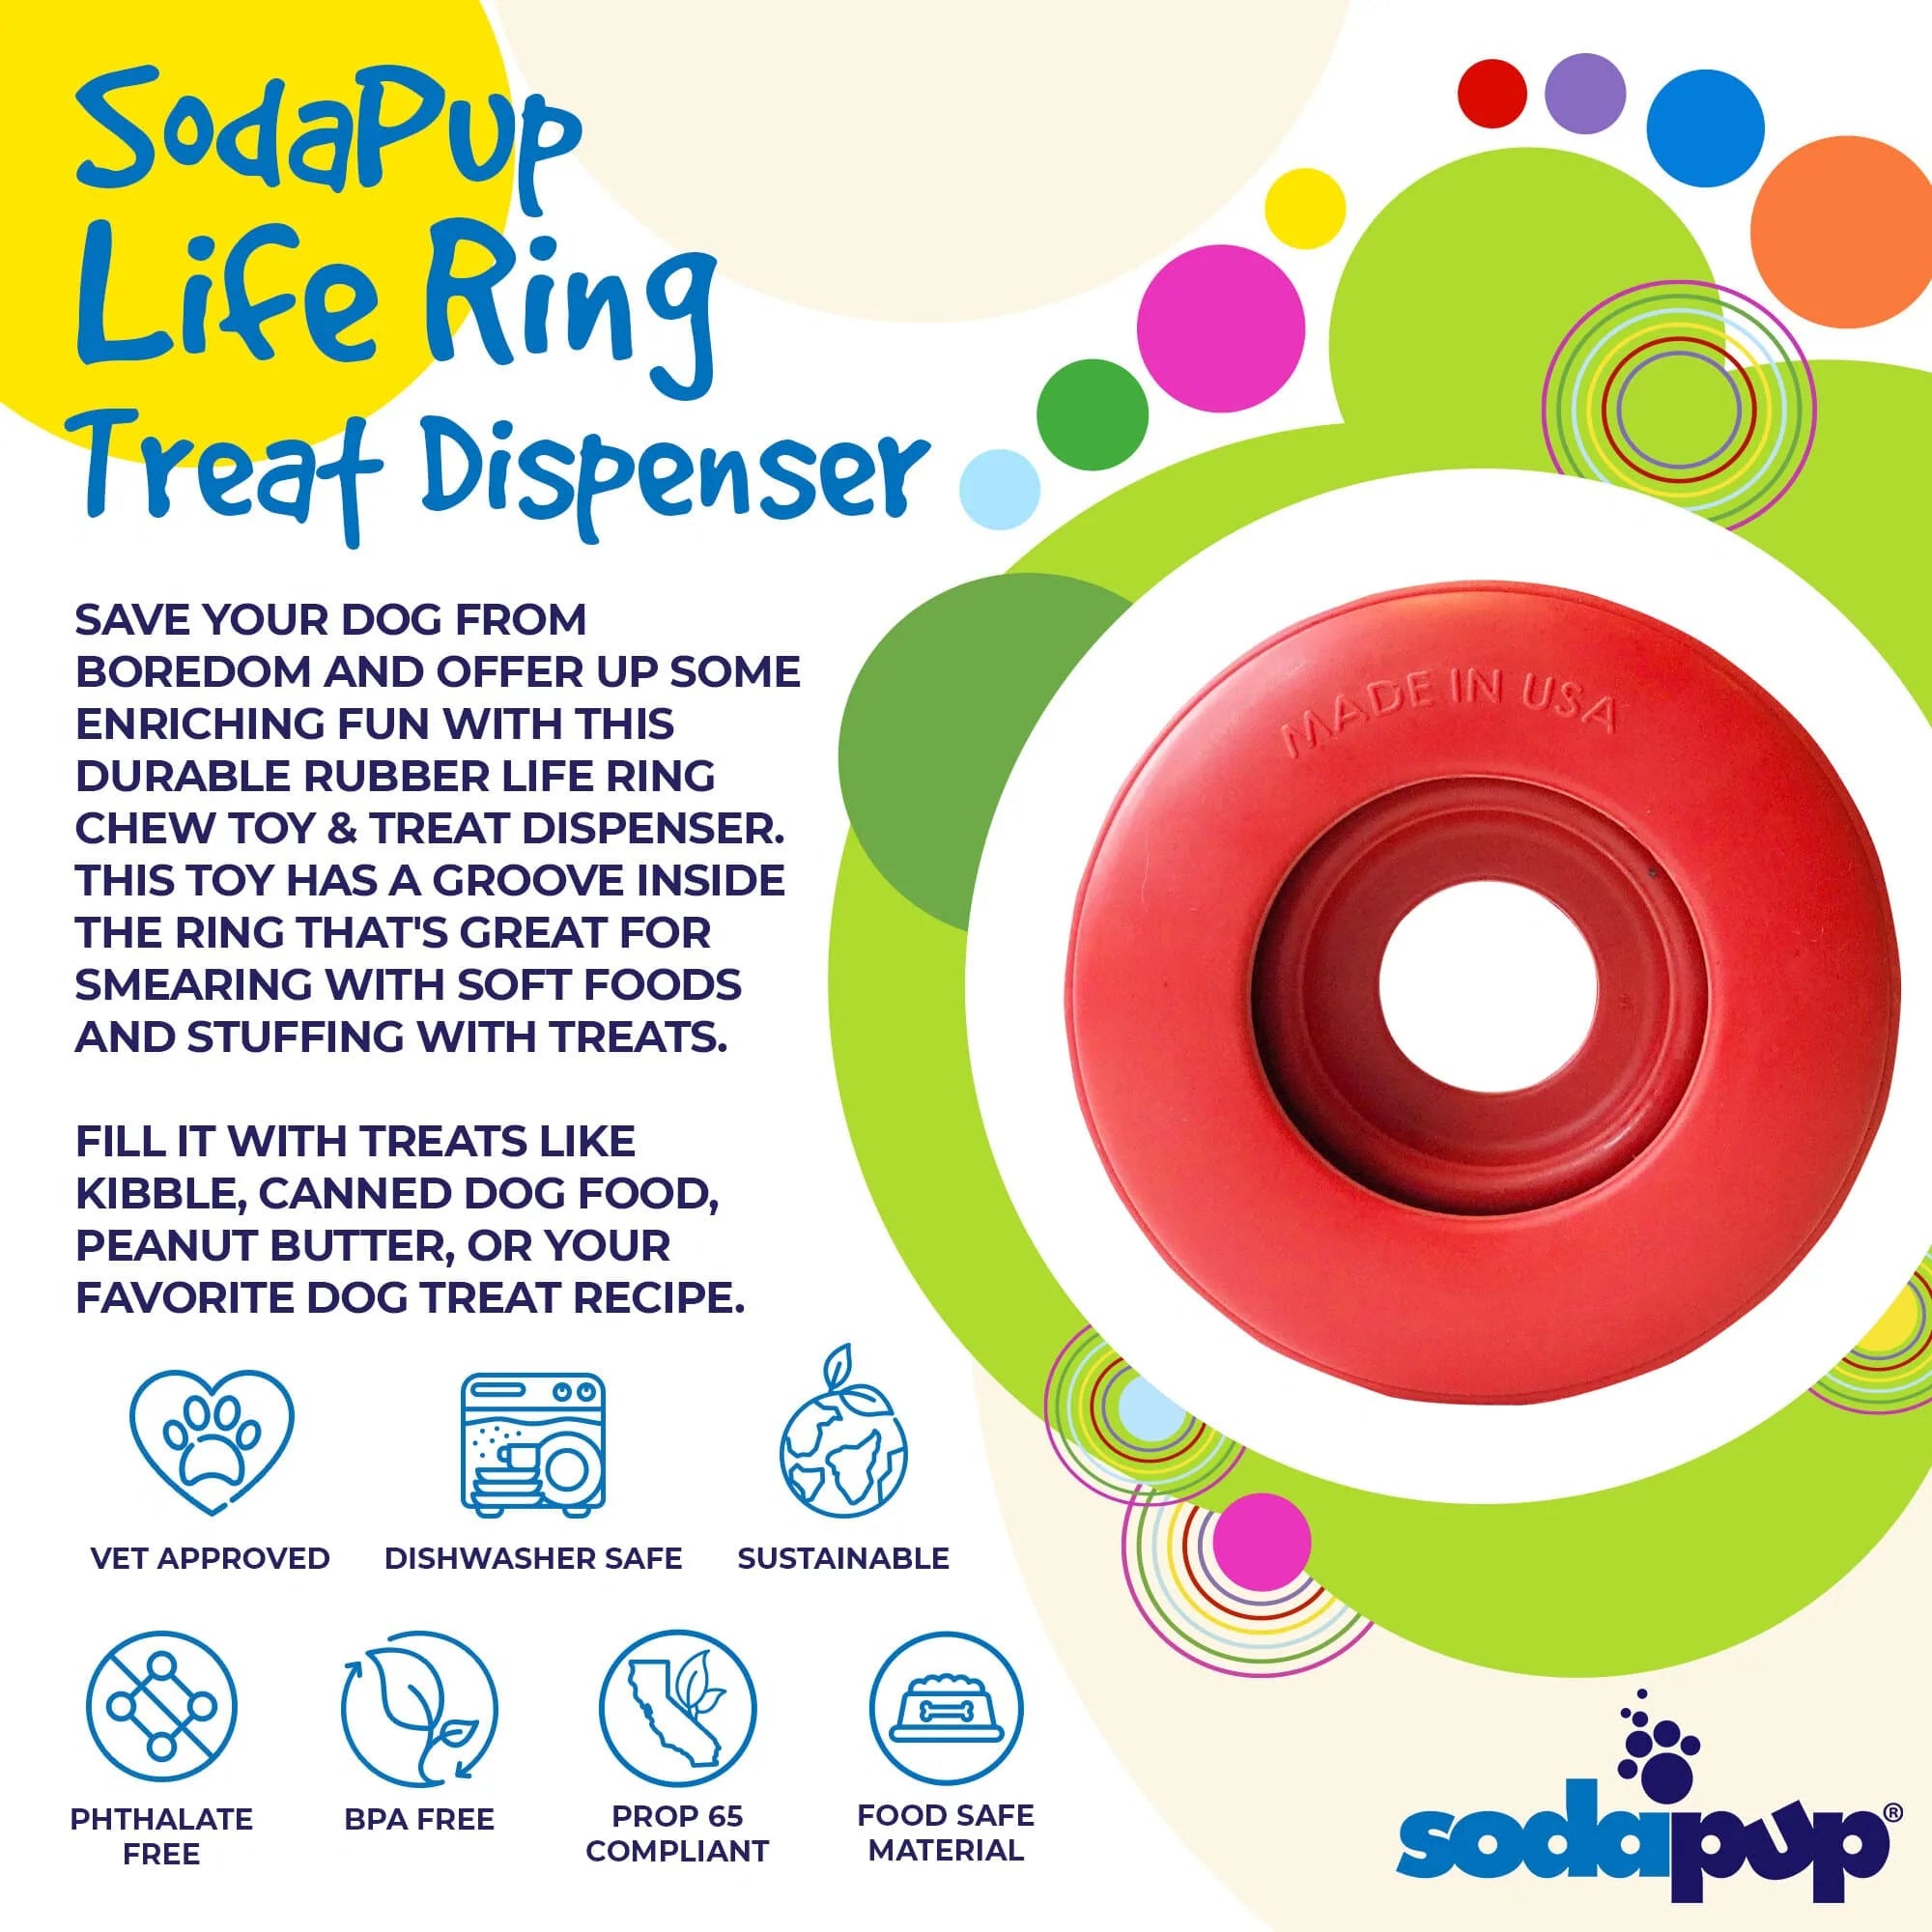 SP Life Ring Durable Rubber Chew Toy &amp; Treat Dispenser